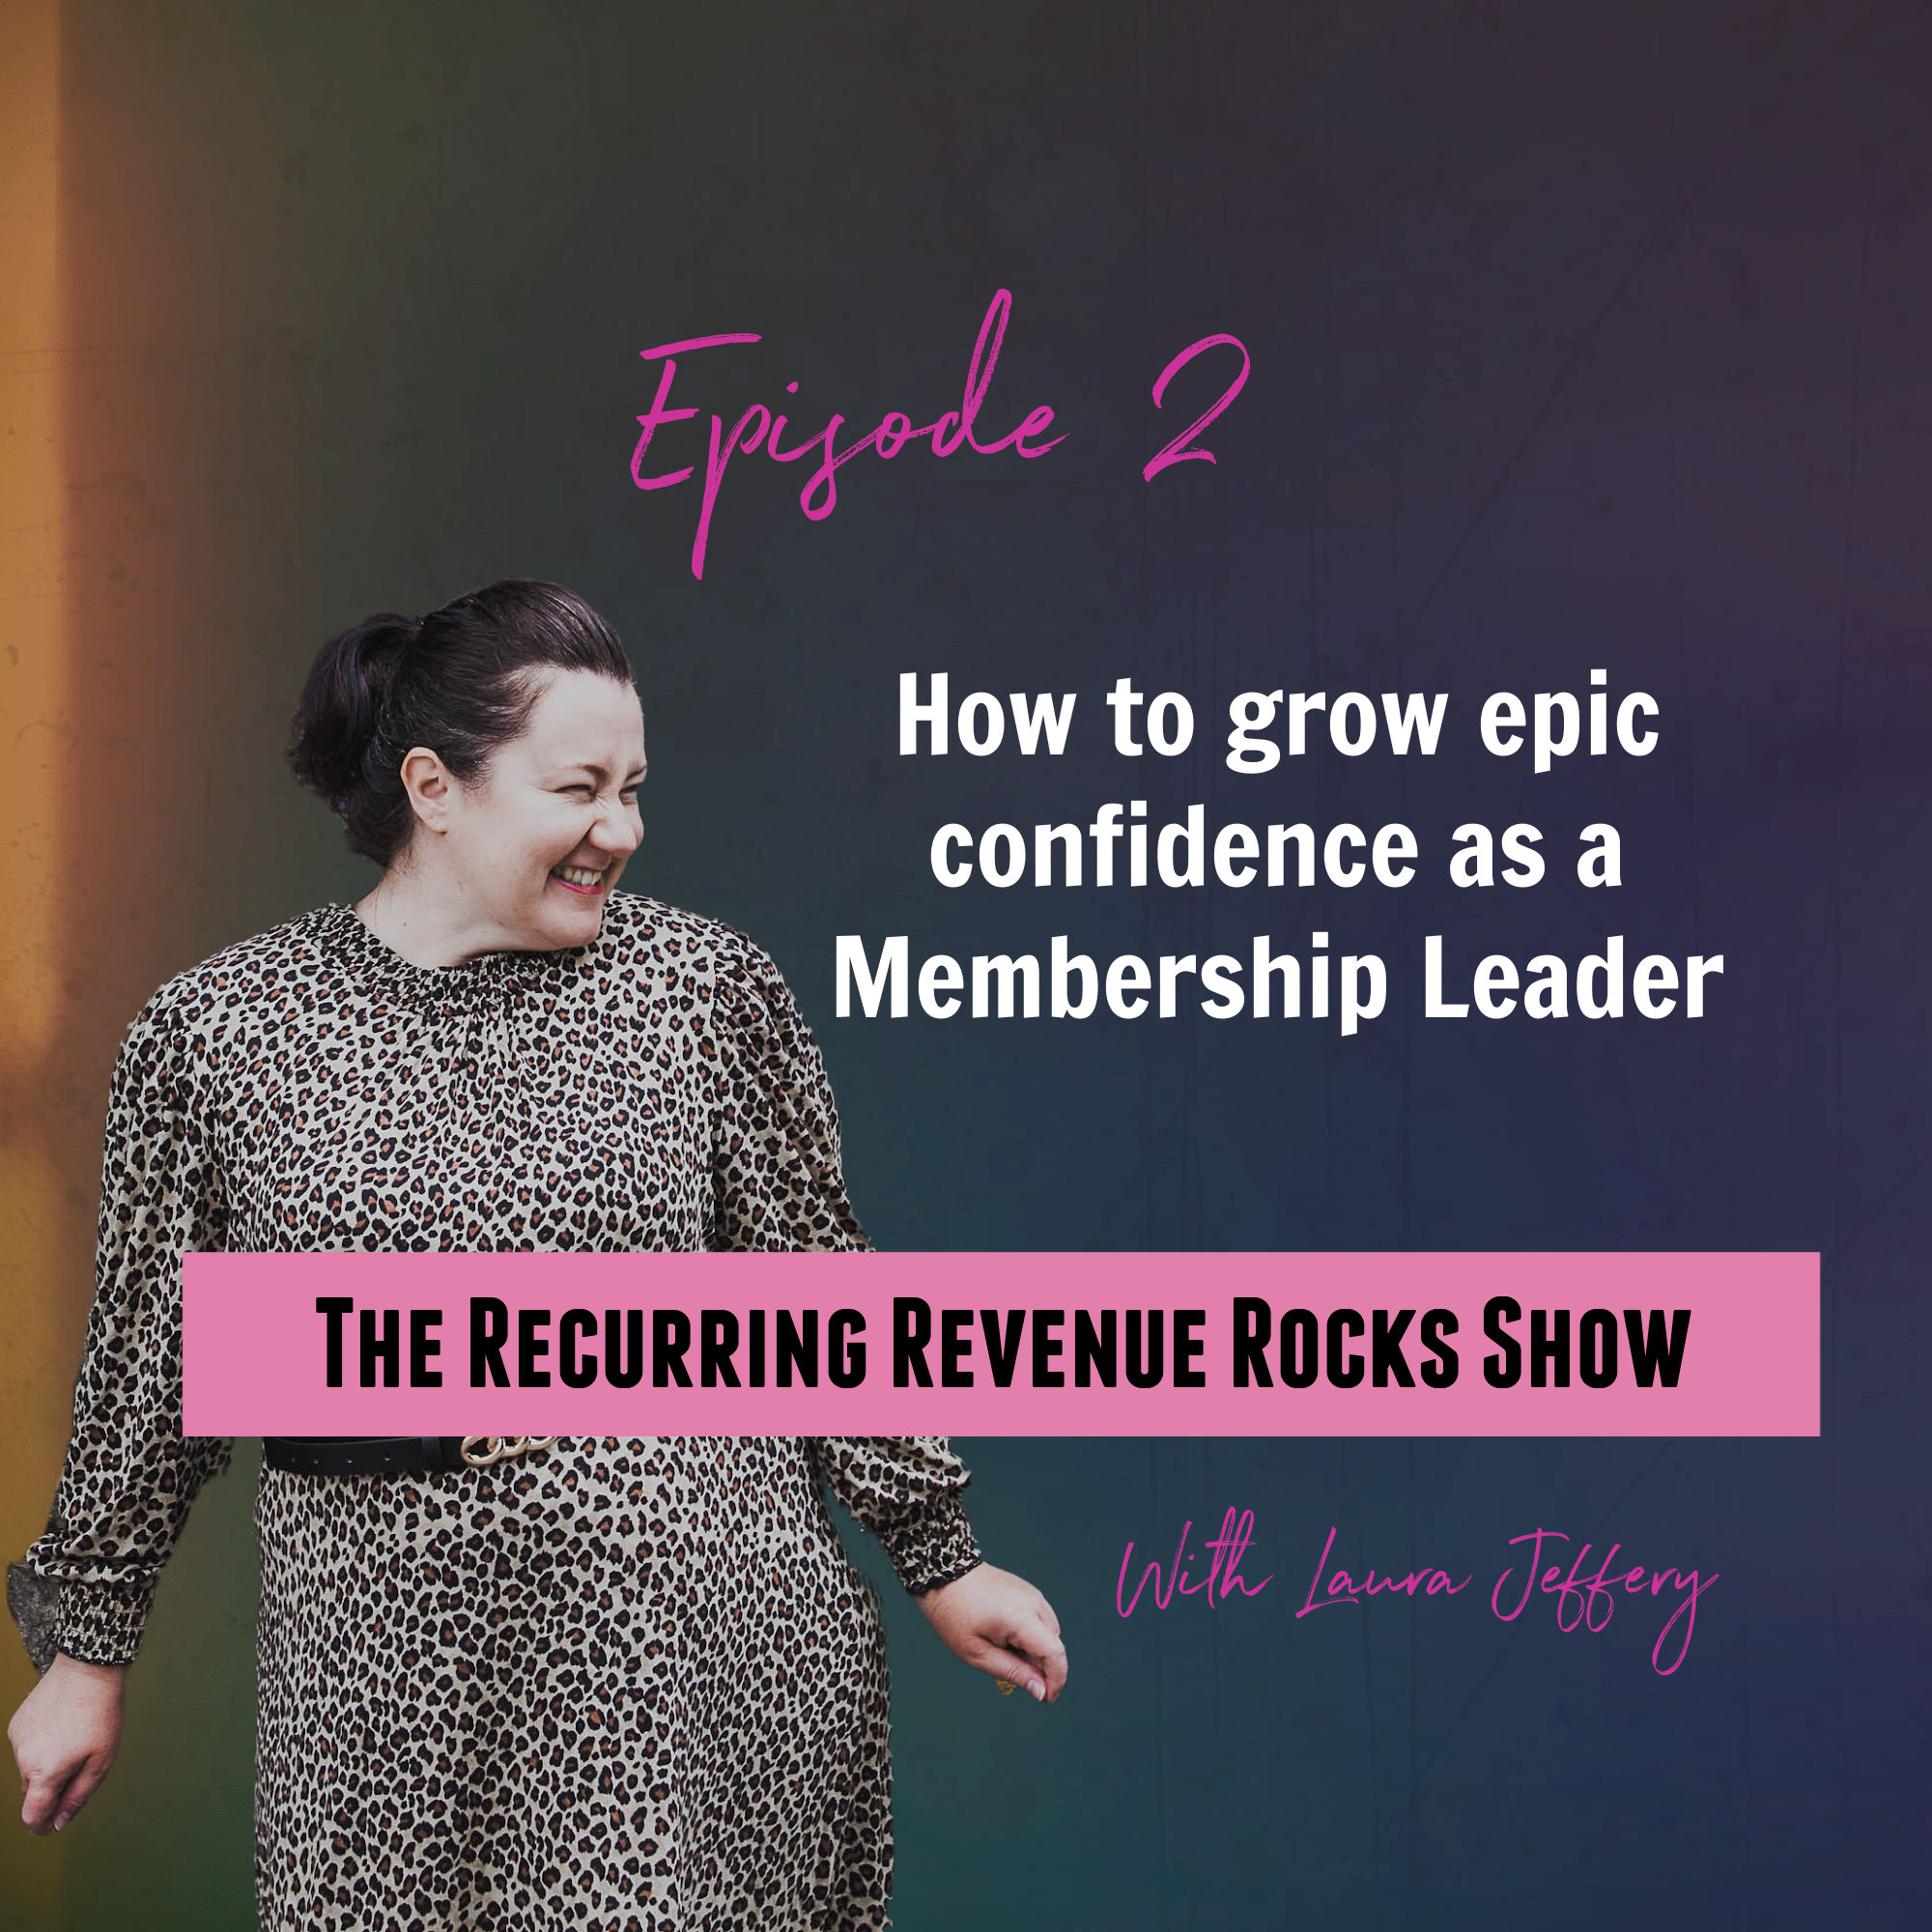 How to grow epic confidence as a Membership Leader